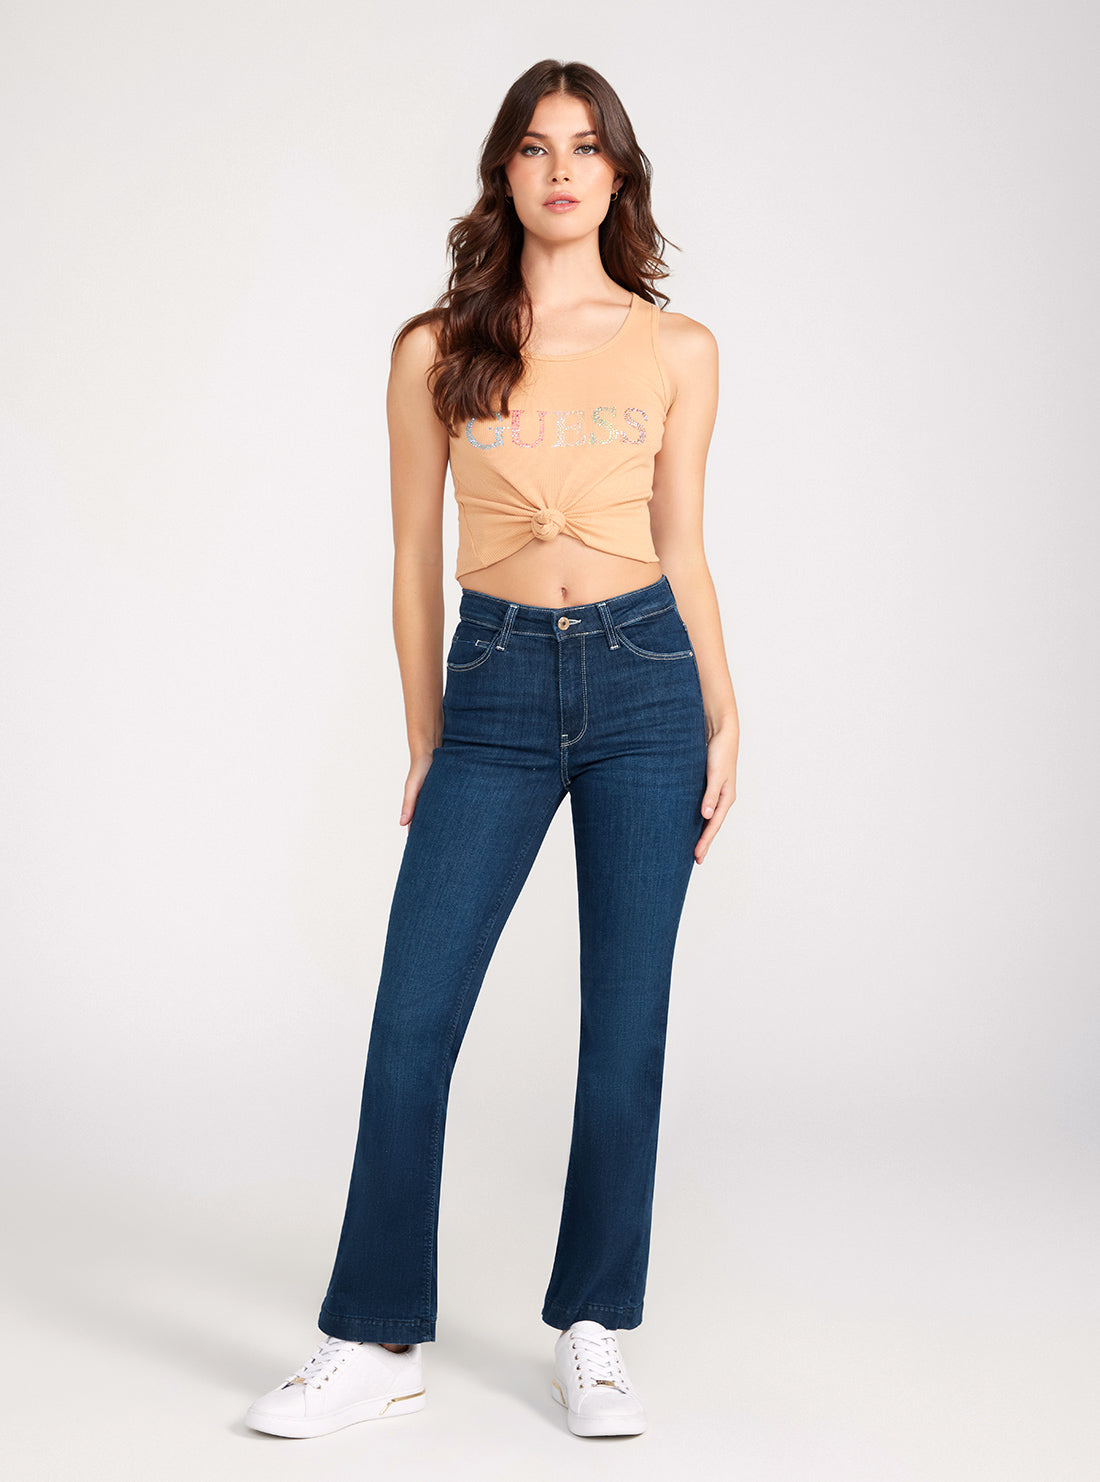 GUESS Mid-Rise Sexy Bootleg Cut Denim Jeans In Dark Wash full view